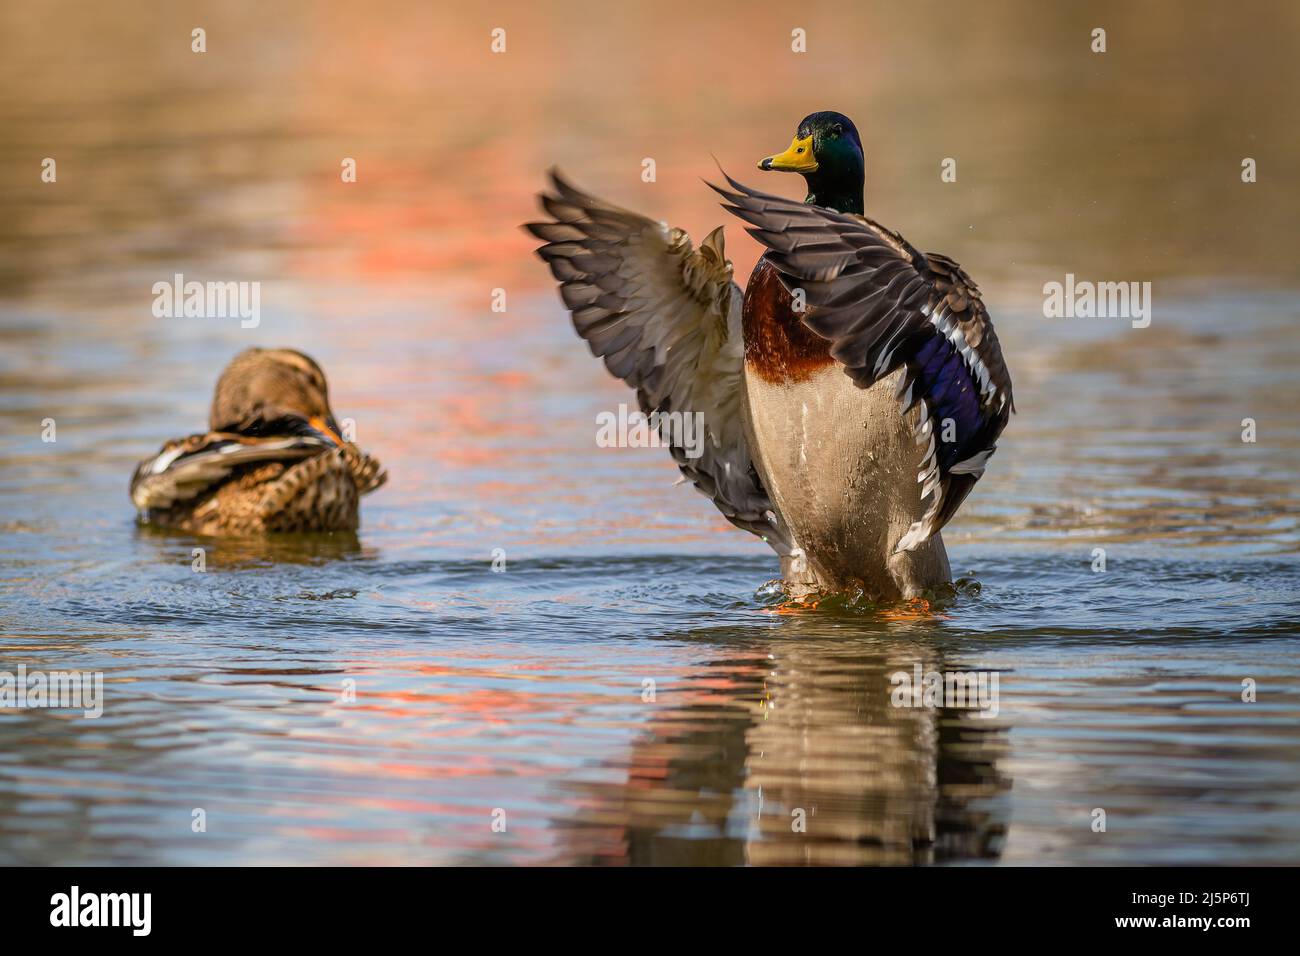 A male mallard duck, a drake, with green head and yellow beak standing in blue water waving its wings. A female duck next to him. Sunny spring day by Stock Photo